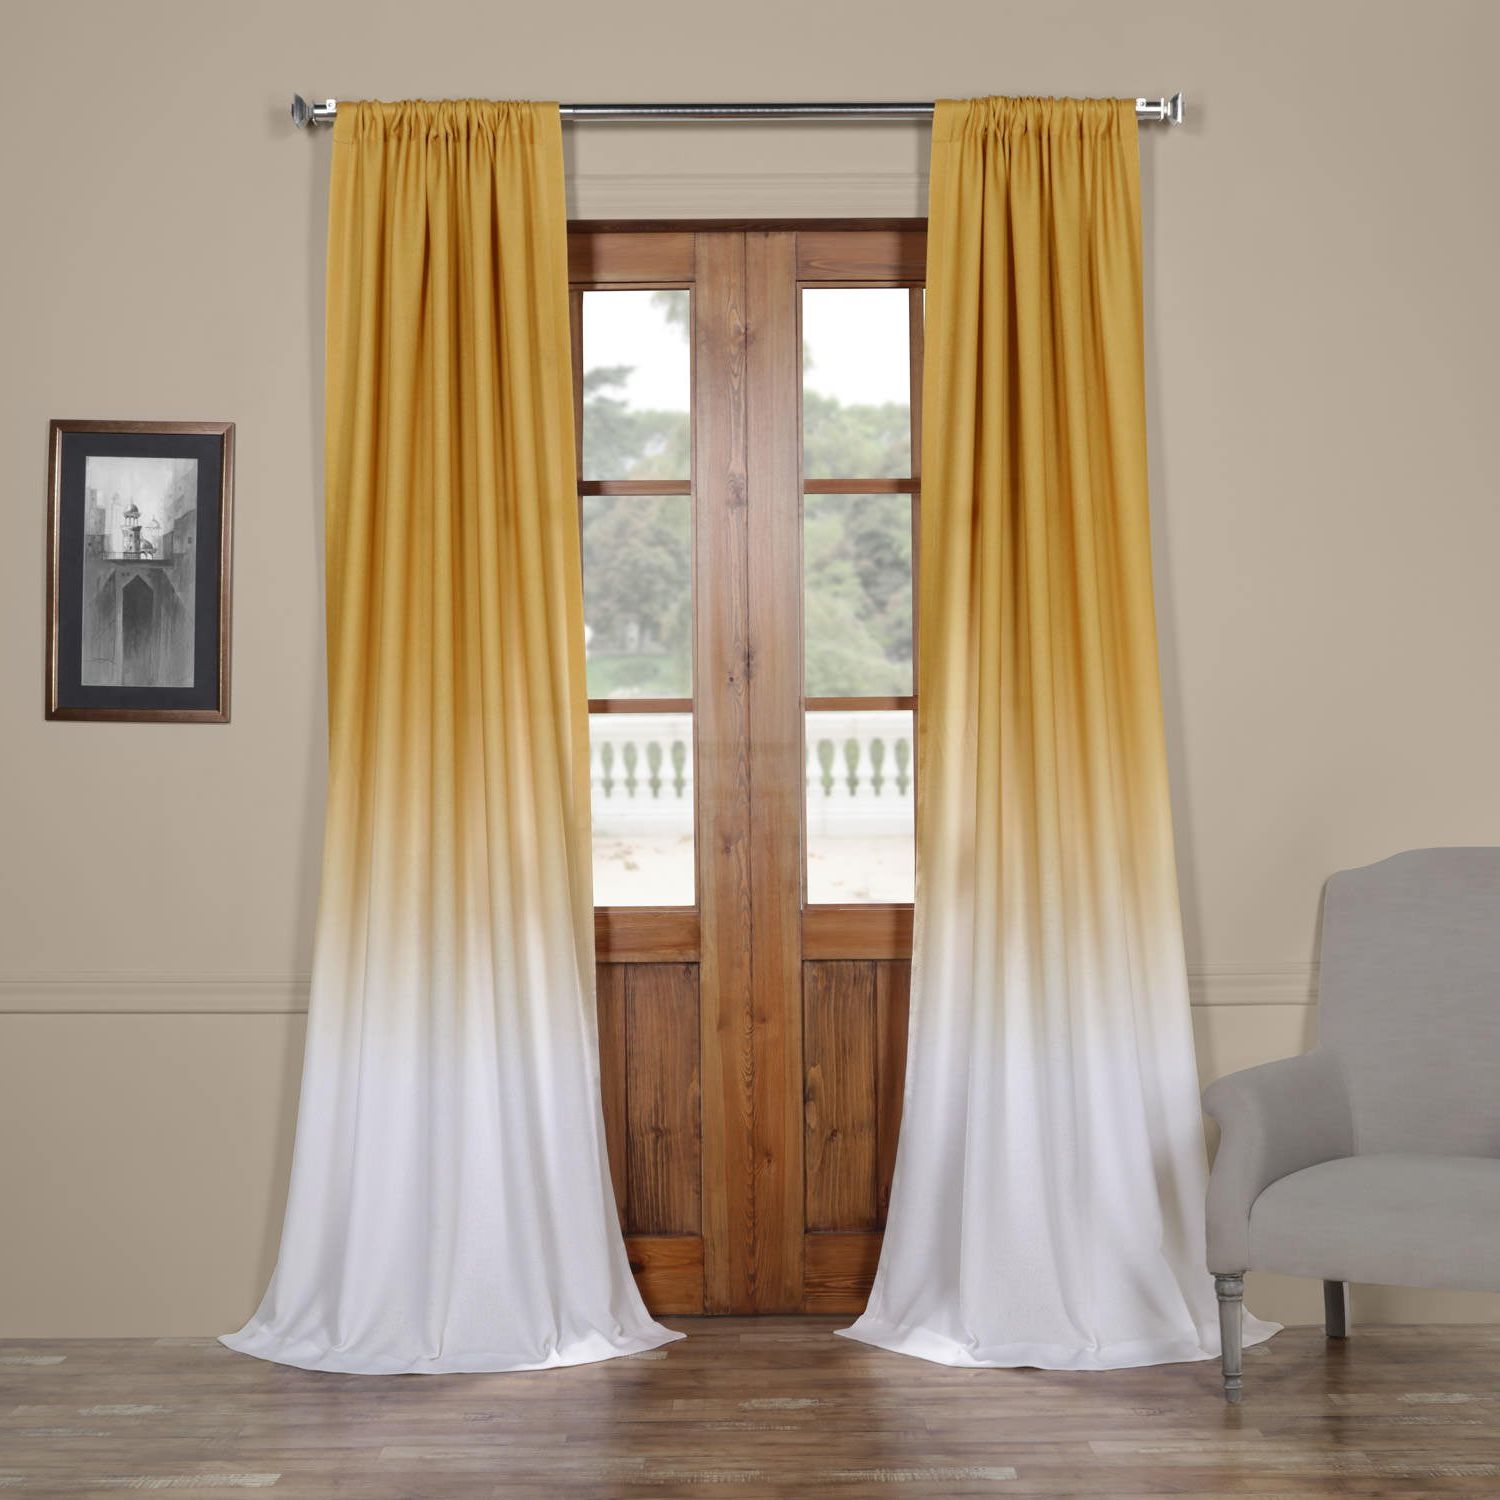 Felch Omb1703 96 Ombre Faux Linen Semi Sheer Curtain, Gold, 50 X 96 Regarding Current Ombre Faux Linen Semi Sheer Curtains (View 6 of 20)